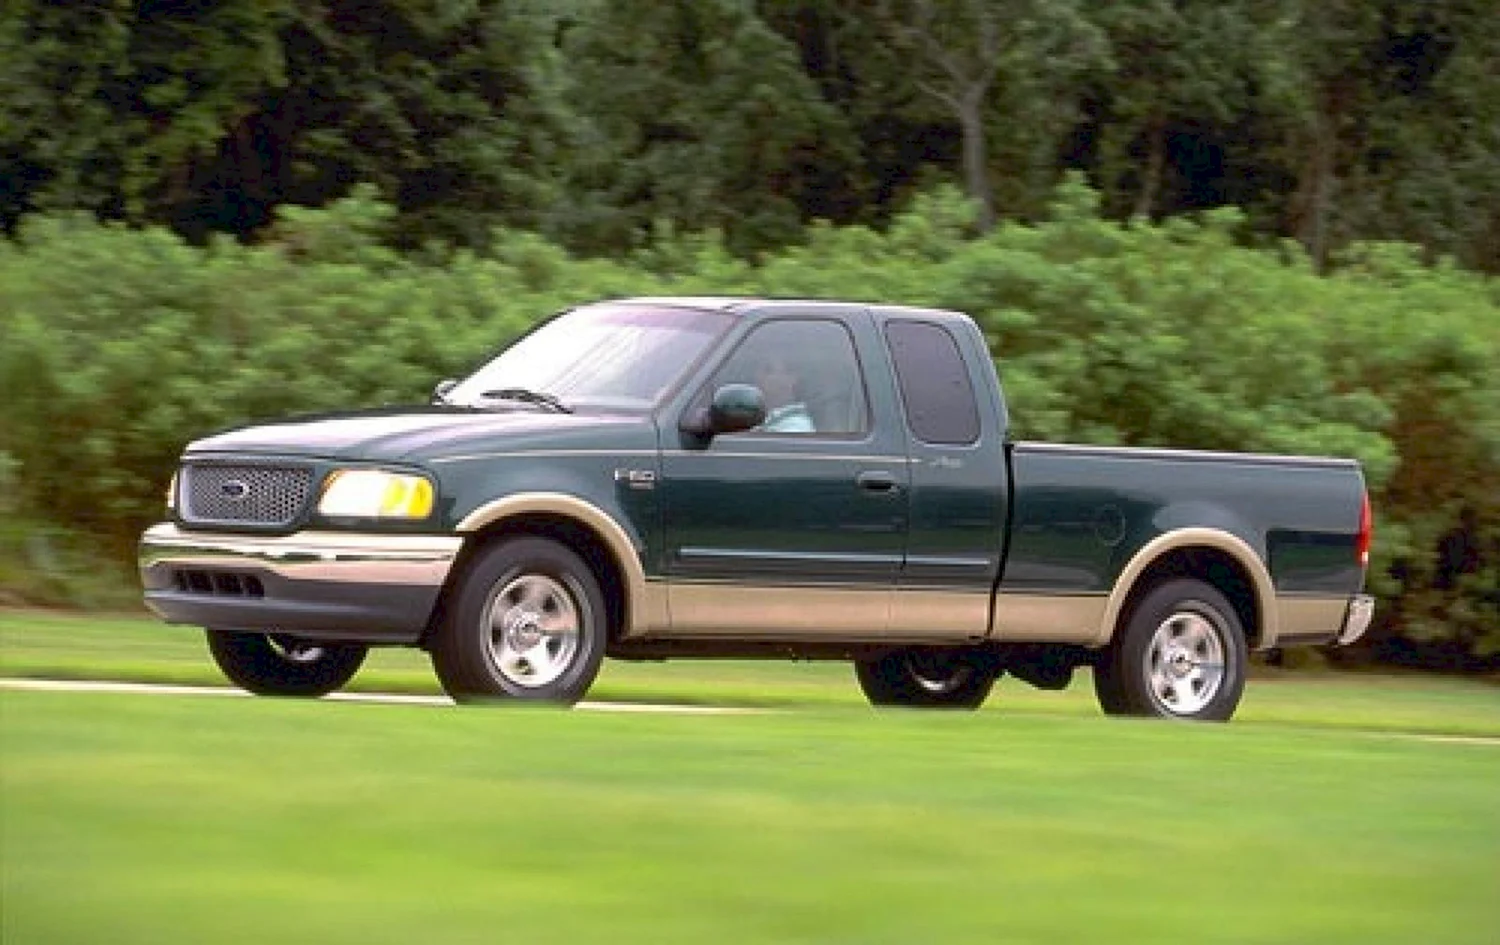 Ford f-150 1996